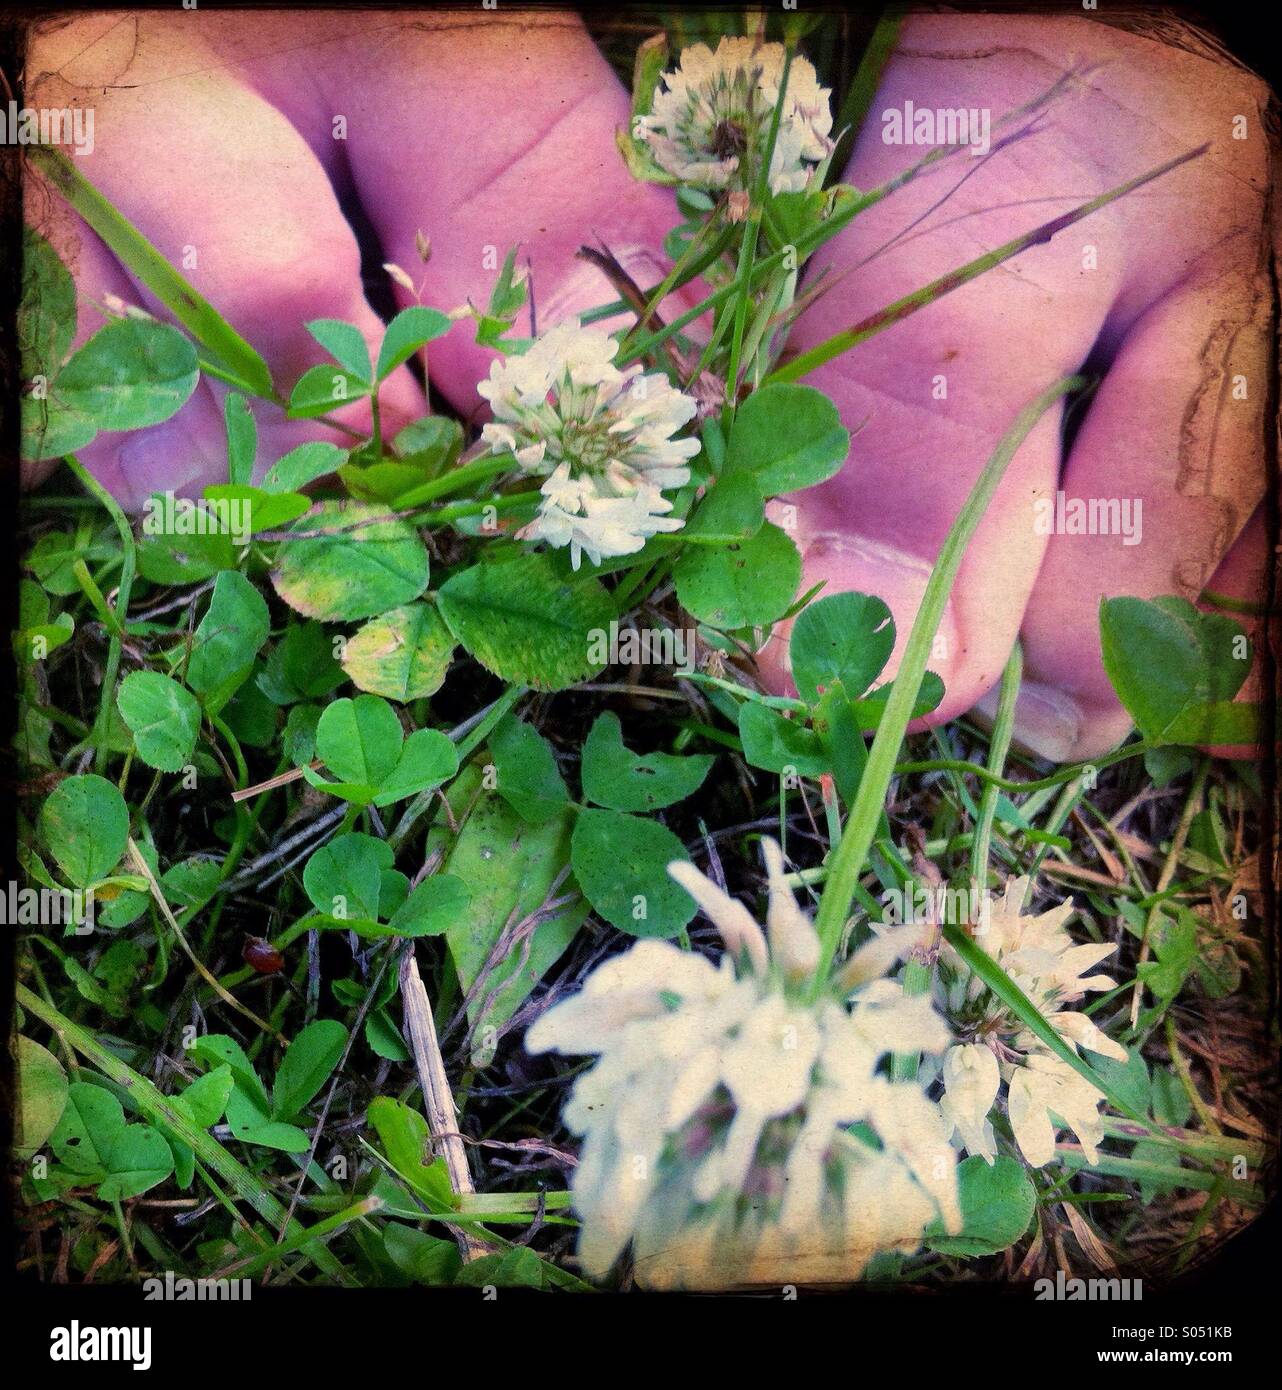 Toes on summer lawn with clovers Stock Photo